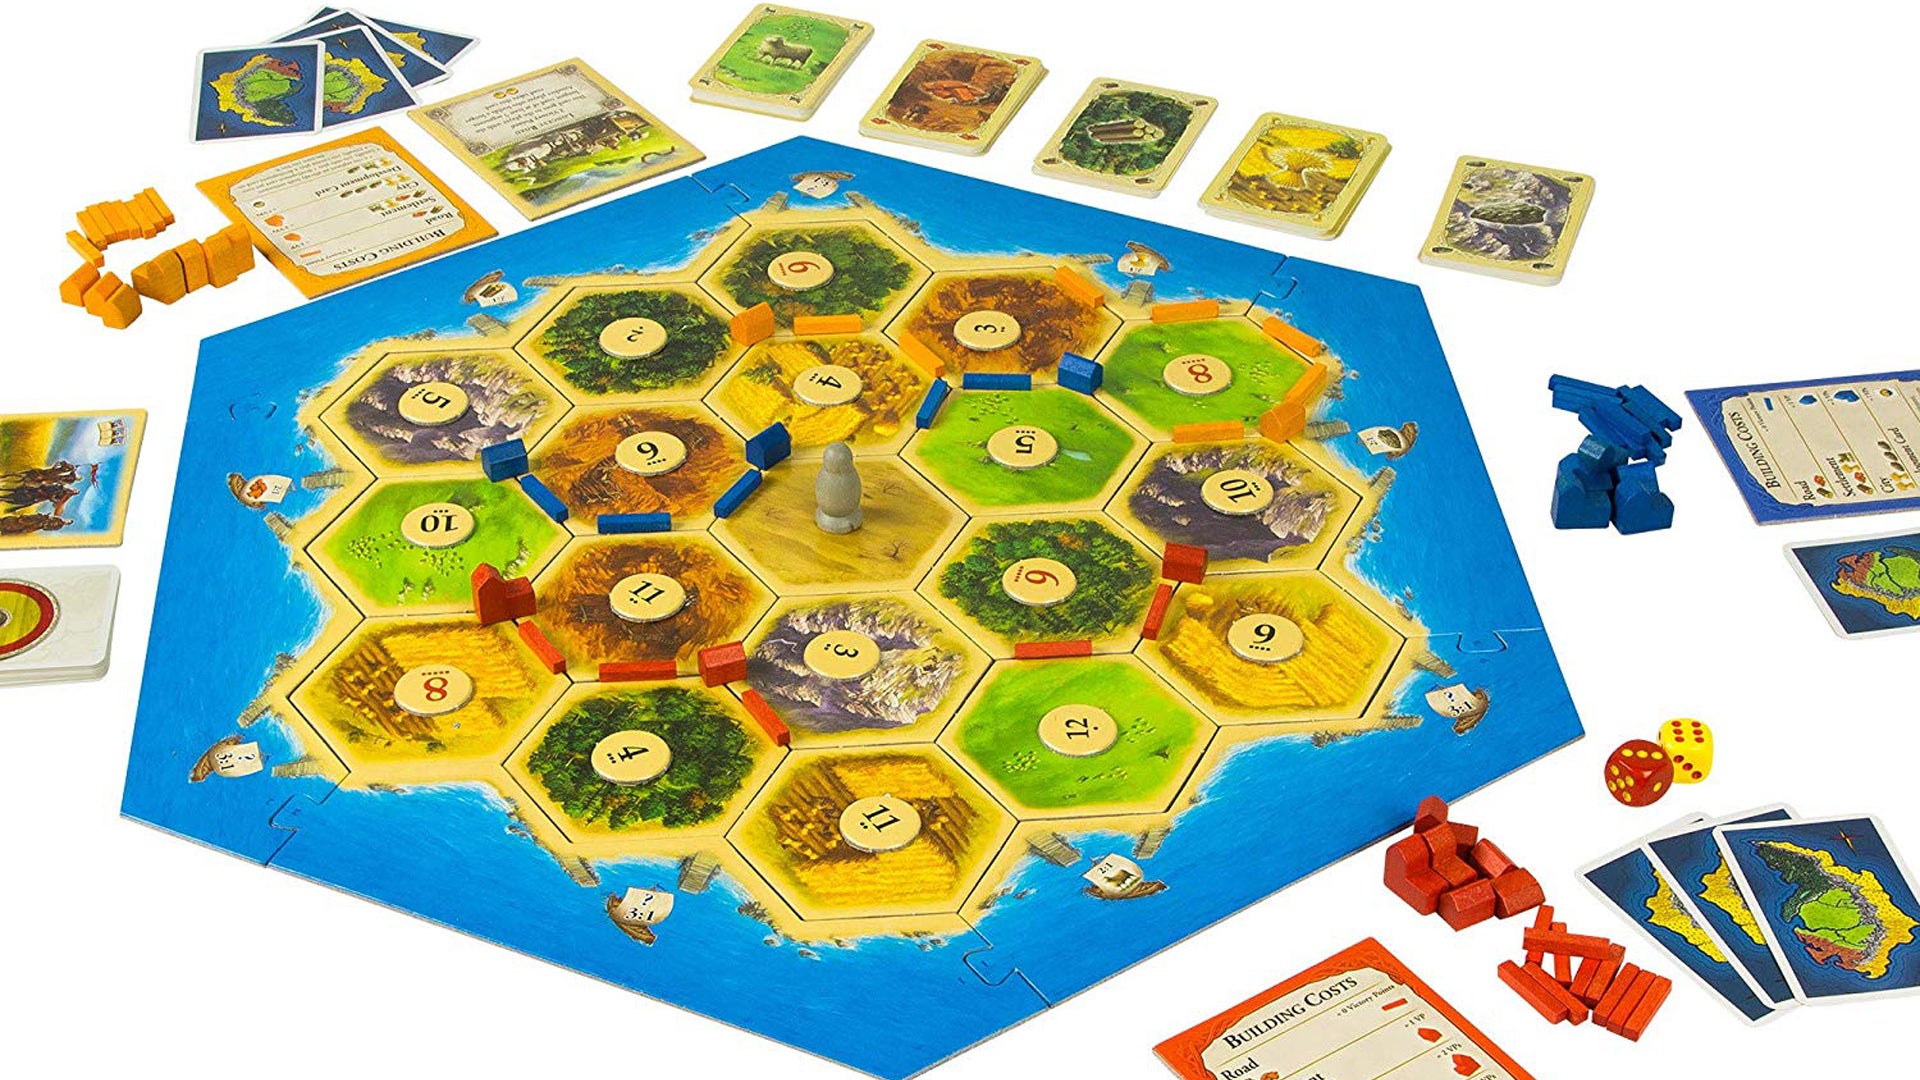 Catan S Two Player Rules And Free Mini Expansion Released For Covid 19 Lockdown Dicebreaker